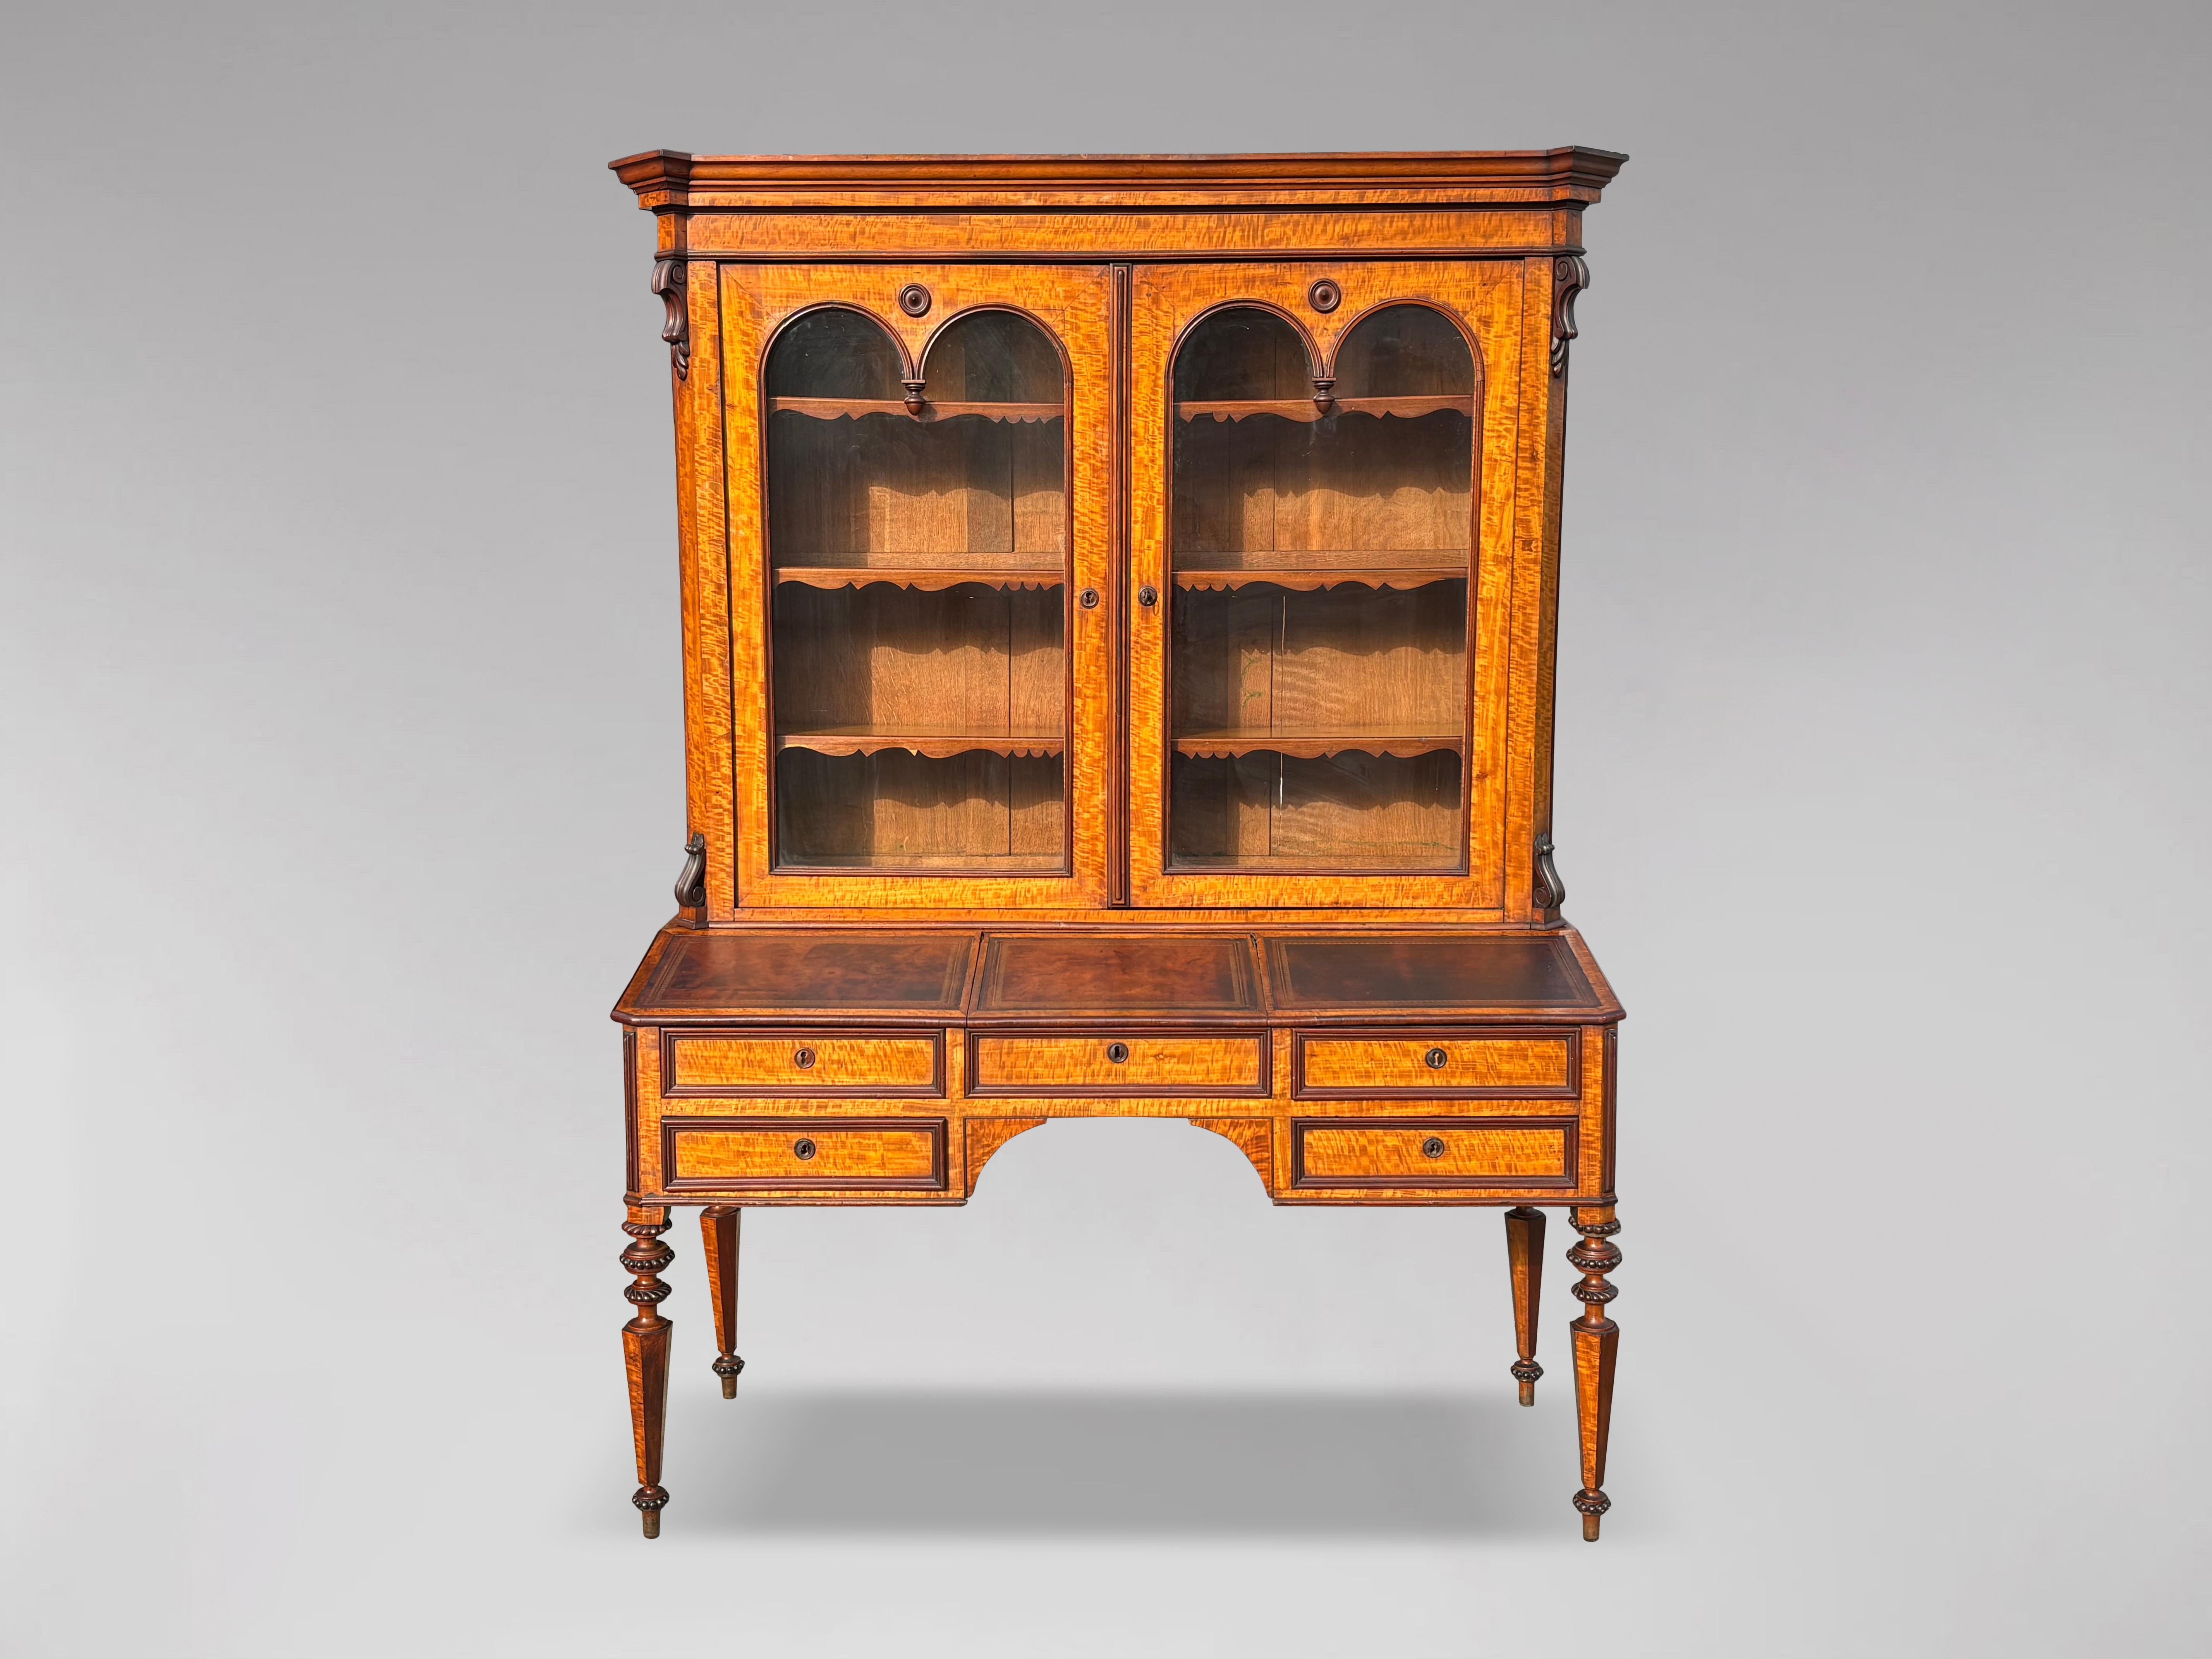 A fine 19th century French Louis-Philippe period maple & mahogany bureau bookcase. Shaped moulded sides and cornice above a pair of shaped glazed doors with adjustable shelves, above a bureau section with three leather tooled sets, above the